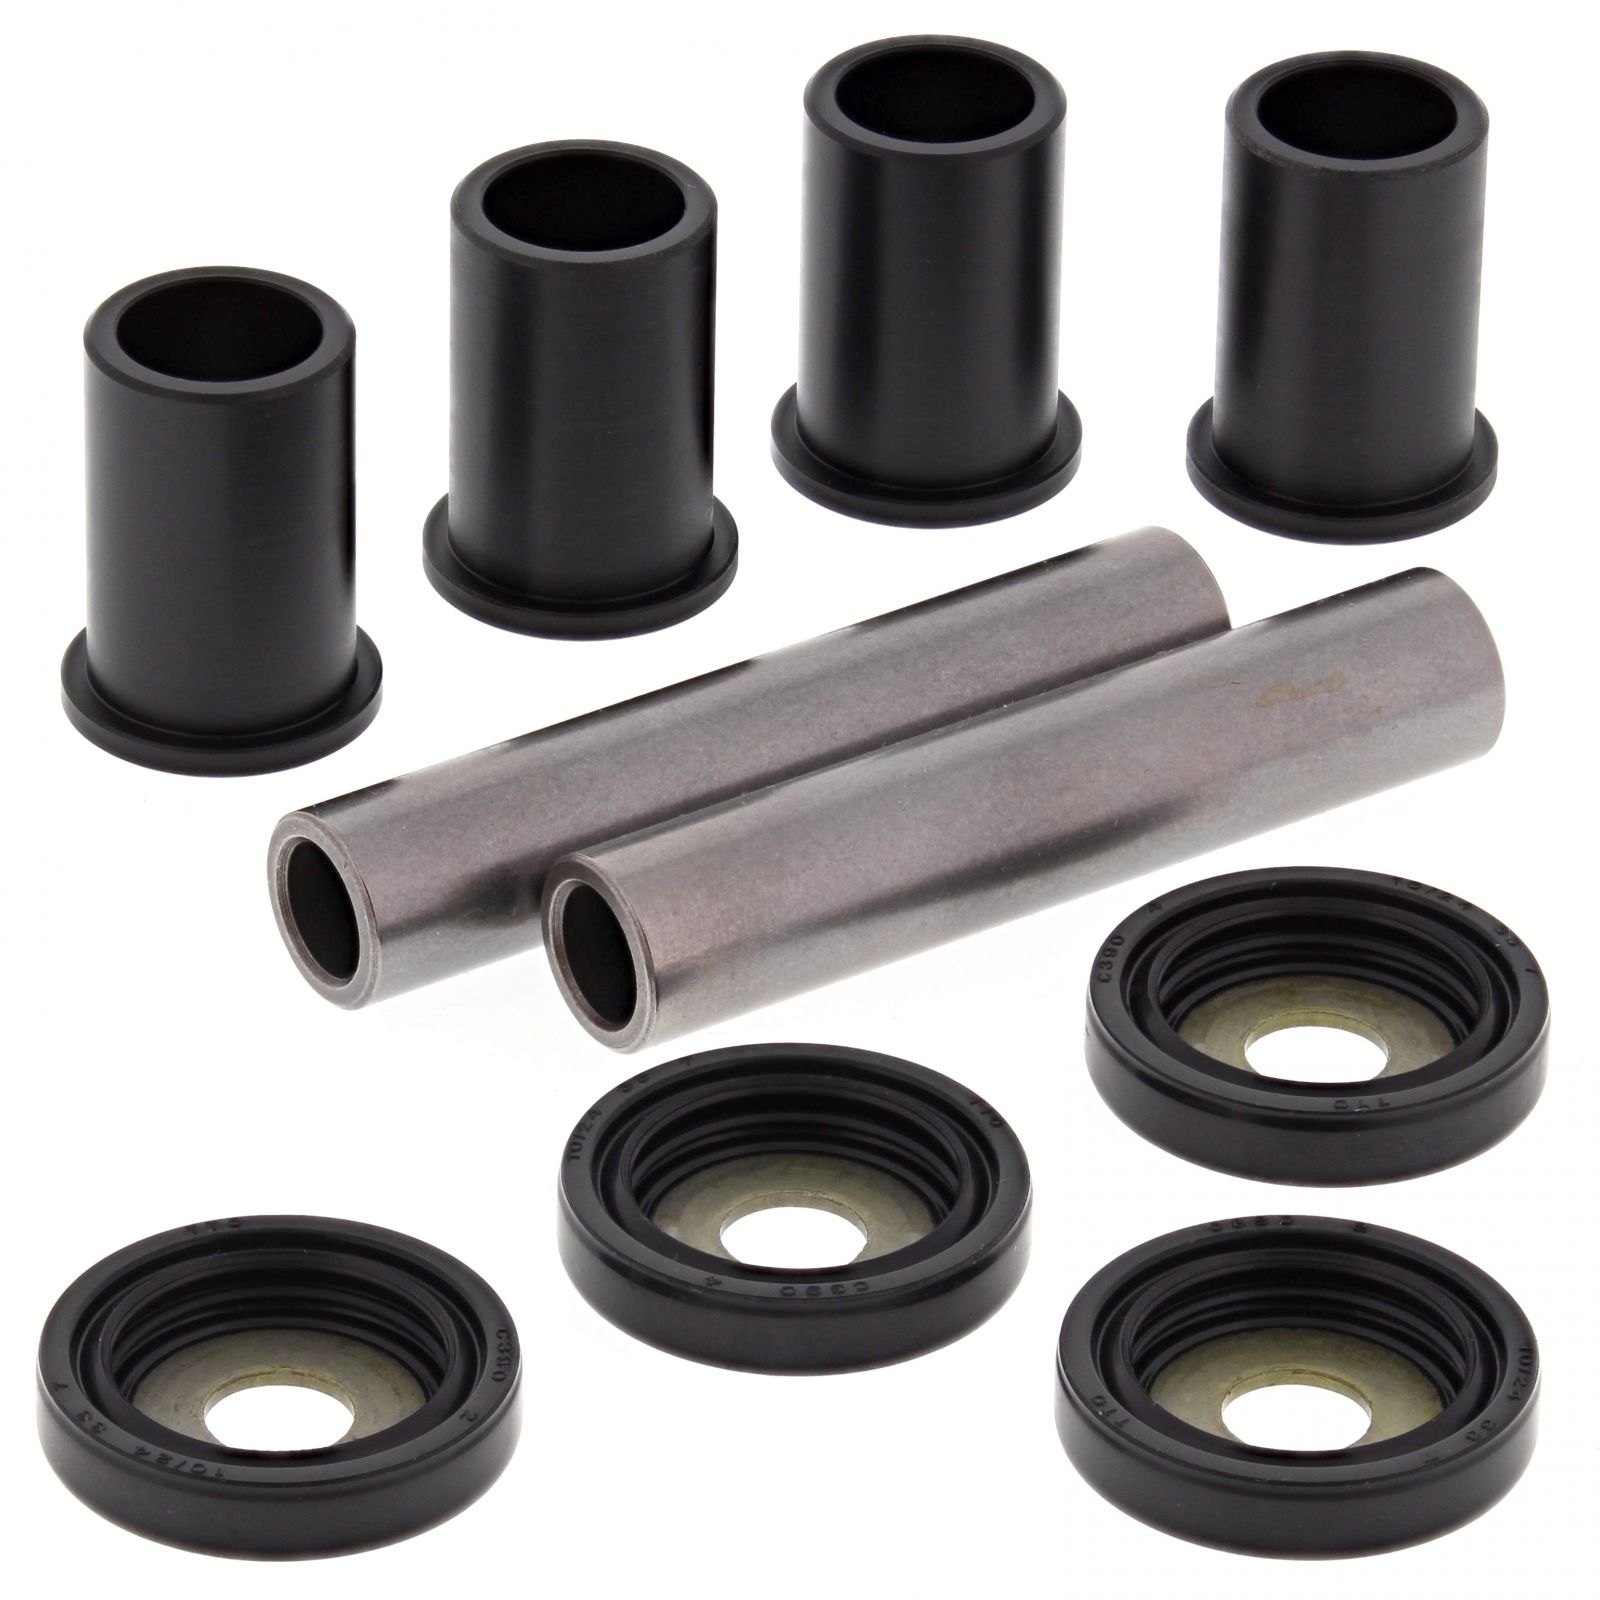 Wrp Rear Ind. Knuckle Kits - WRP501068-K image